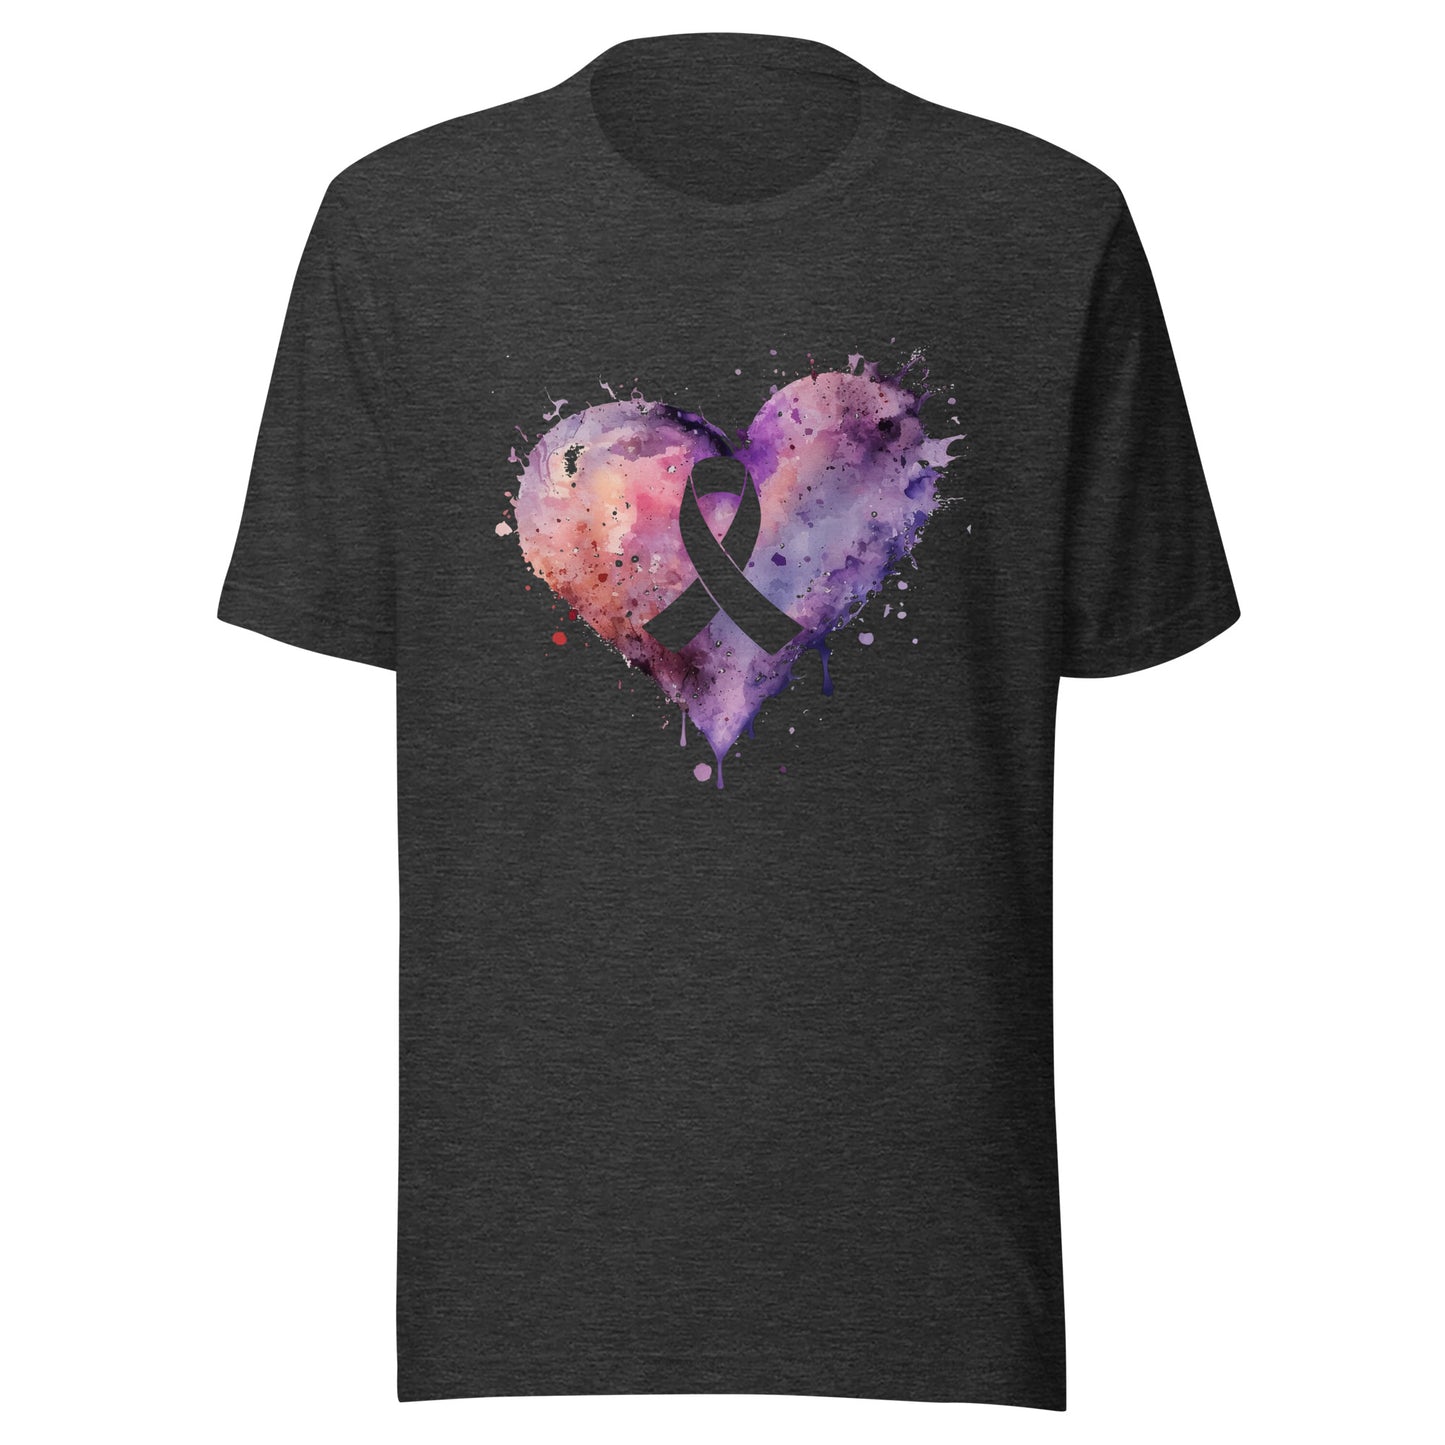 Ribbon in Center of Heart - Cancer - Digital Watercolor Graphic Design Unisex T-shirt